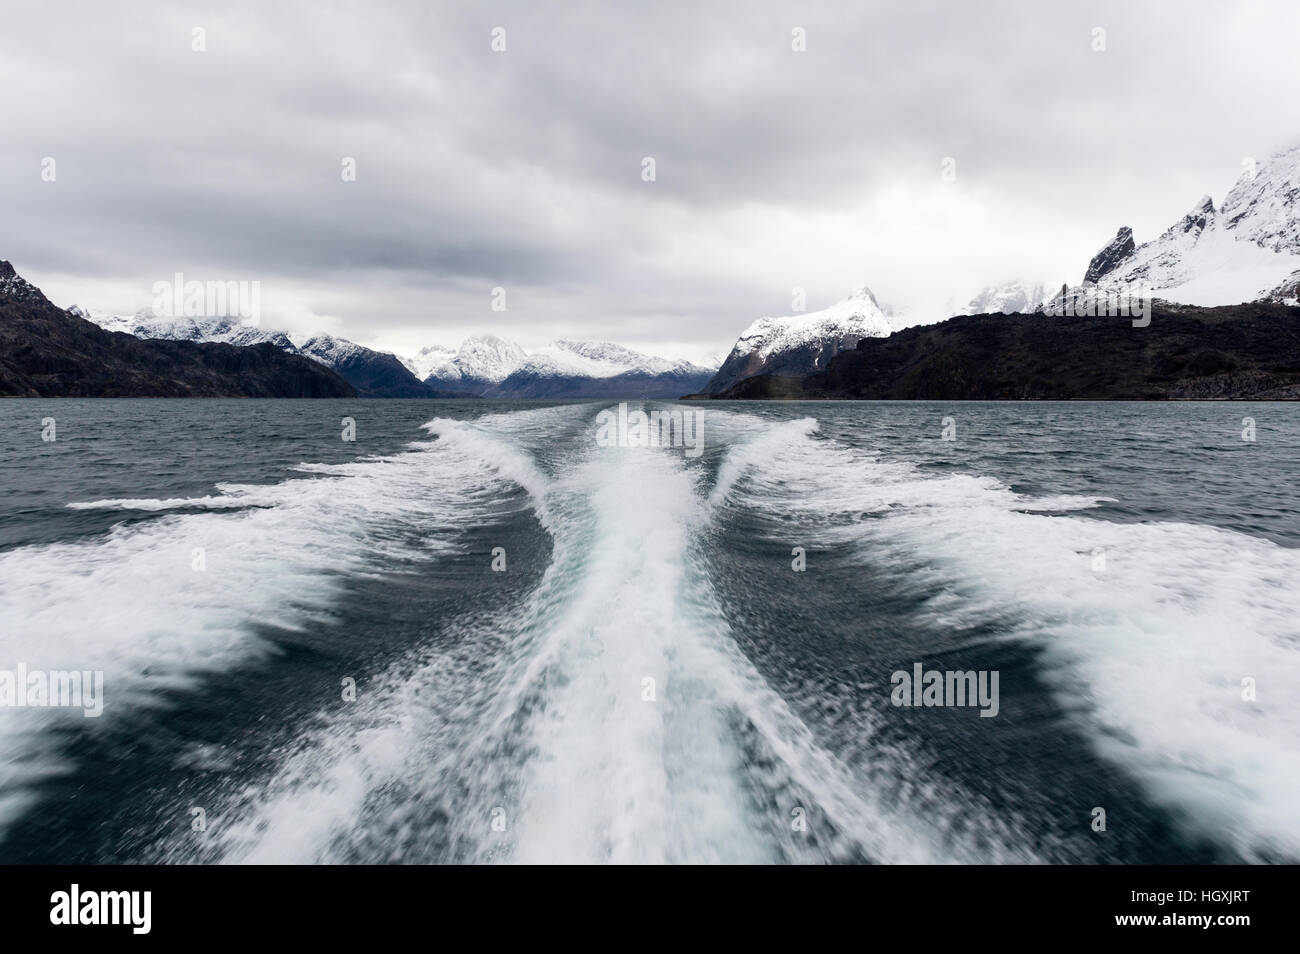 A boats wake peels between snow covered peaks in a fjord. Stock Photo